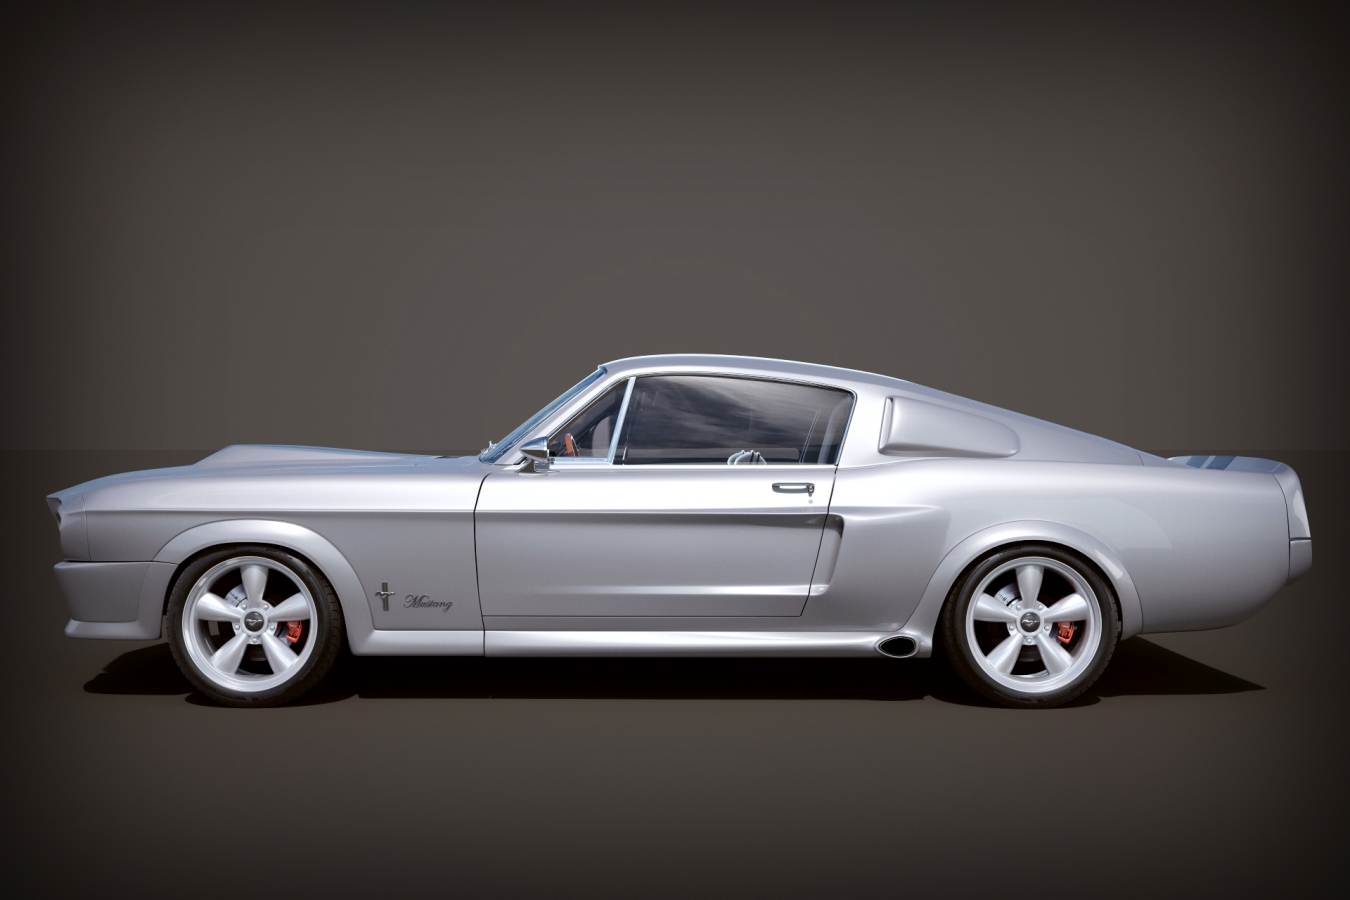 Ford-Mustang-Gt500-Eleanor-view01-View11.jpg